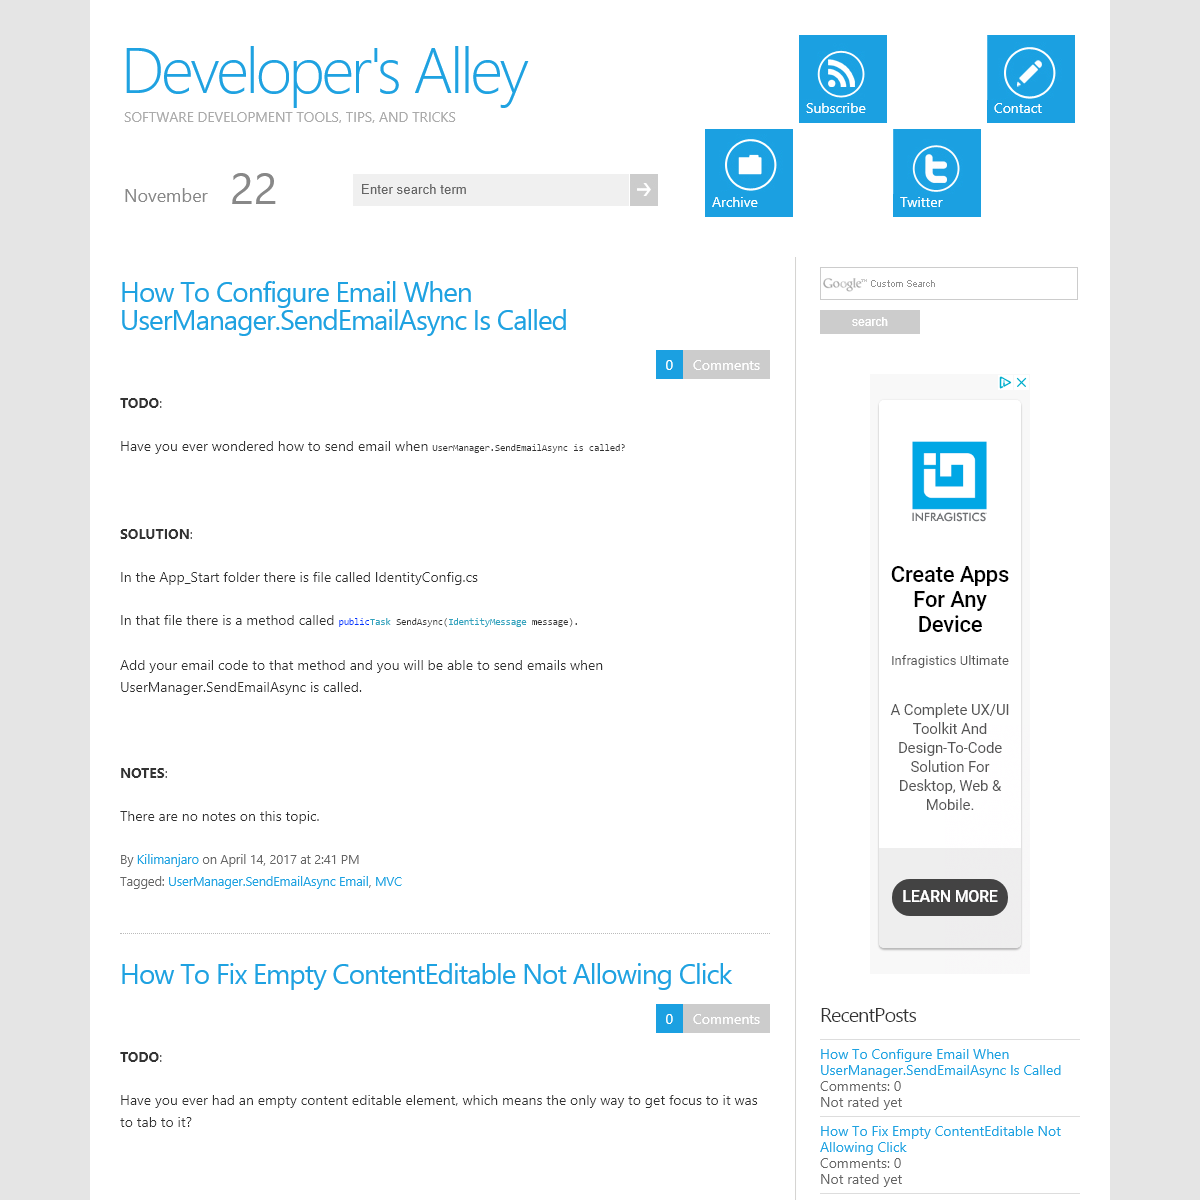 A complete backup of developersalley.com